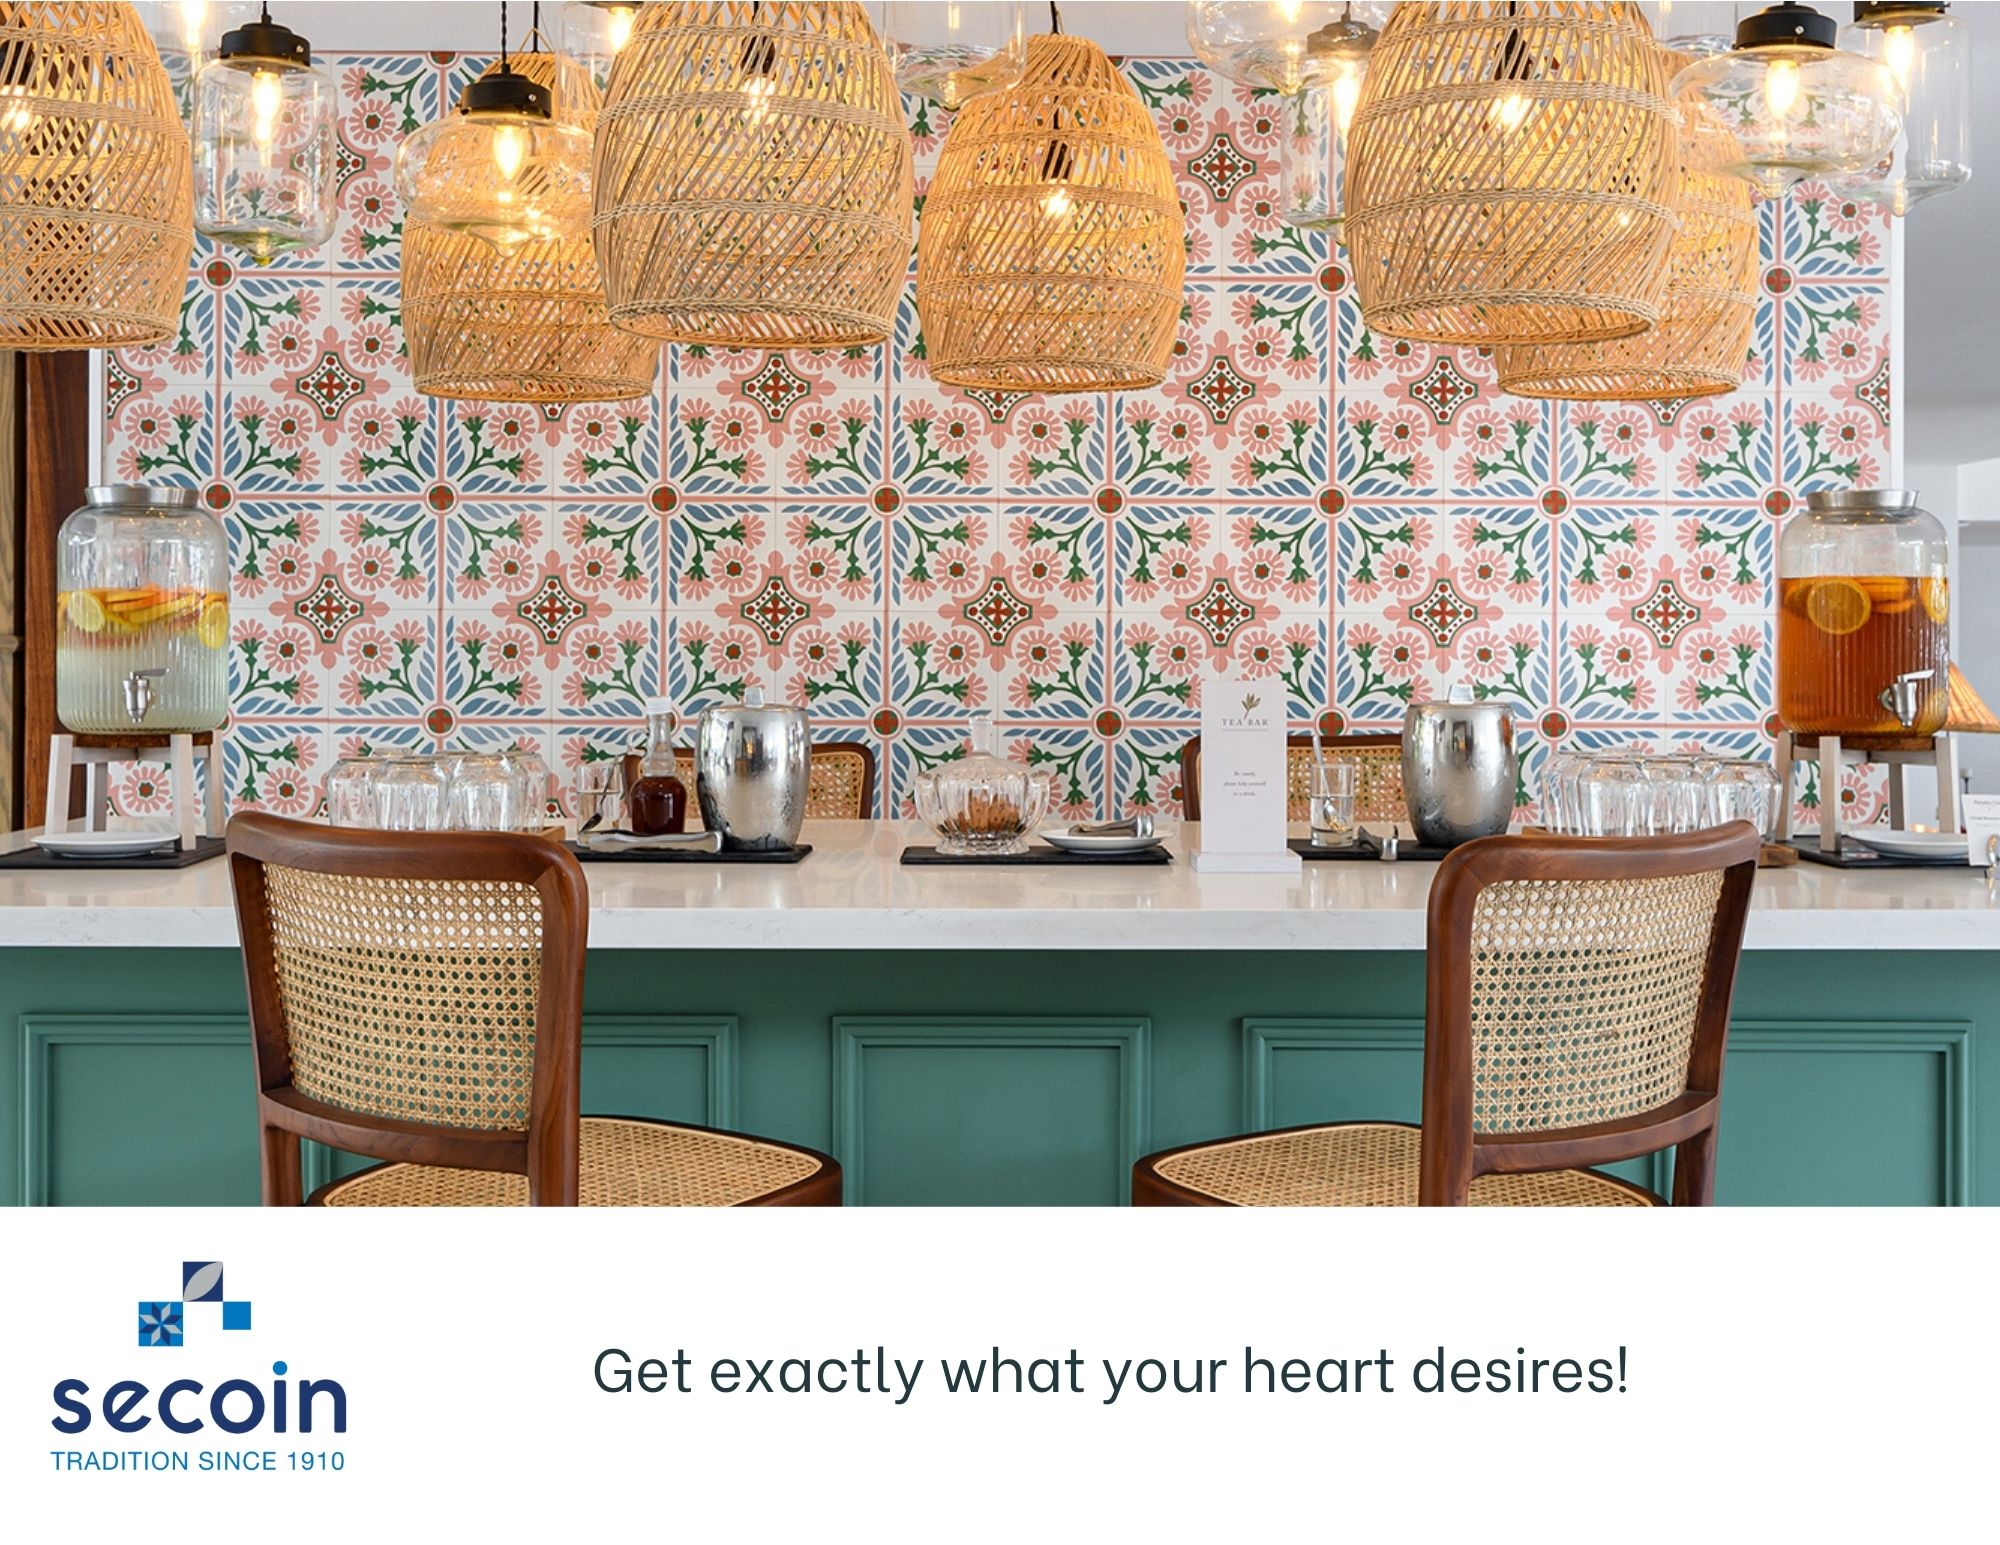 Cement_tiles_-_get_exactly_what_your_heart_desires